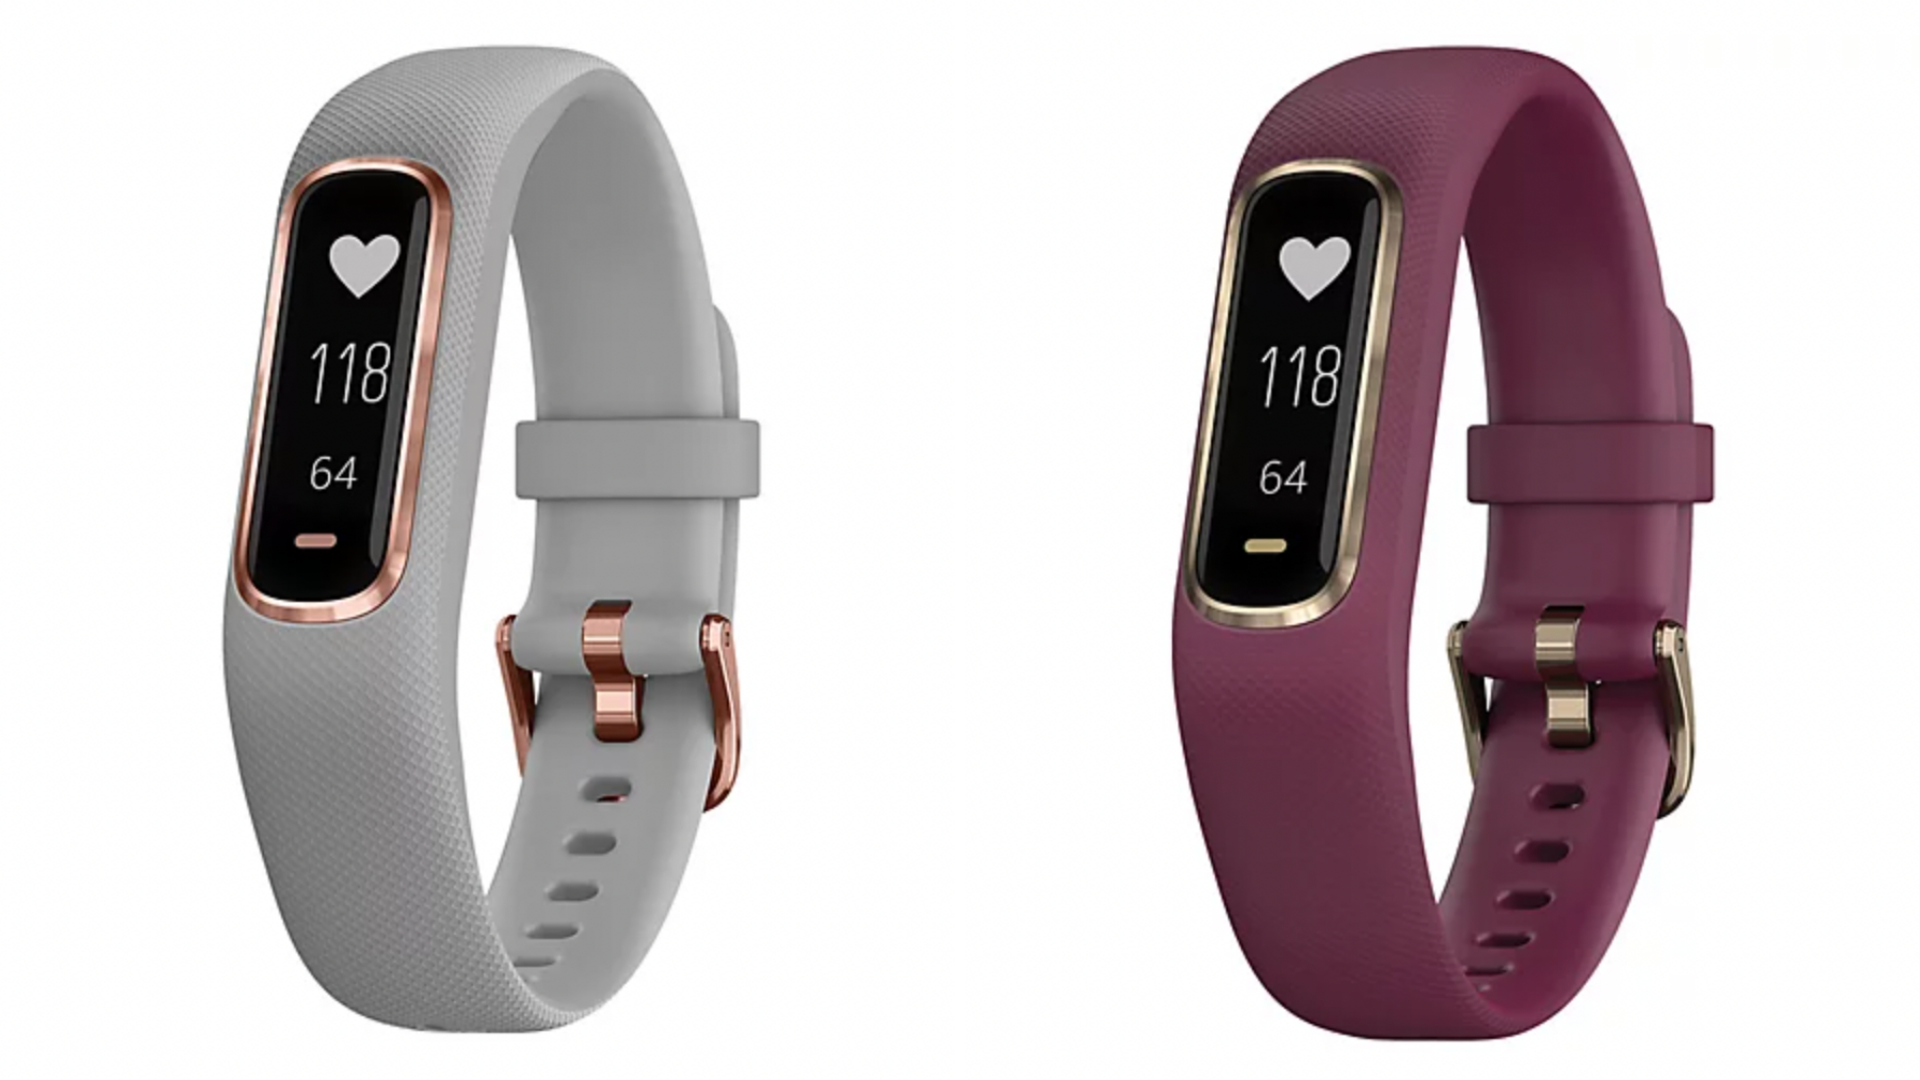 Two white and maroon fitness trackers.